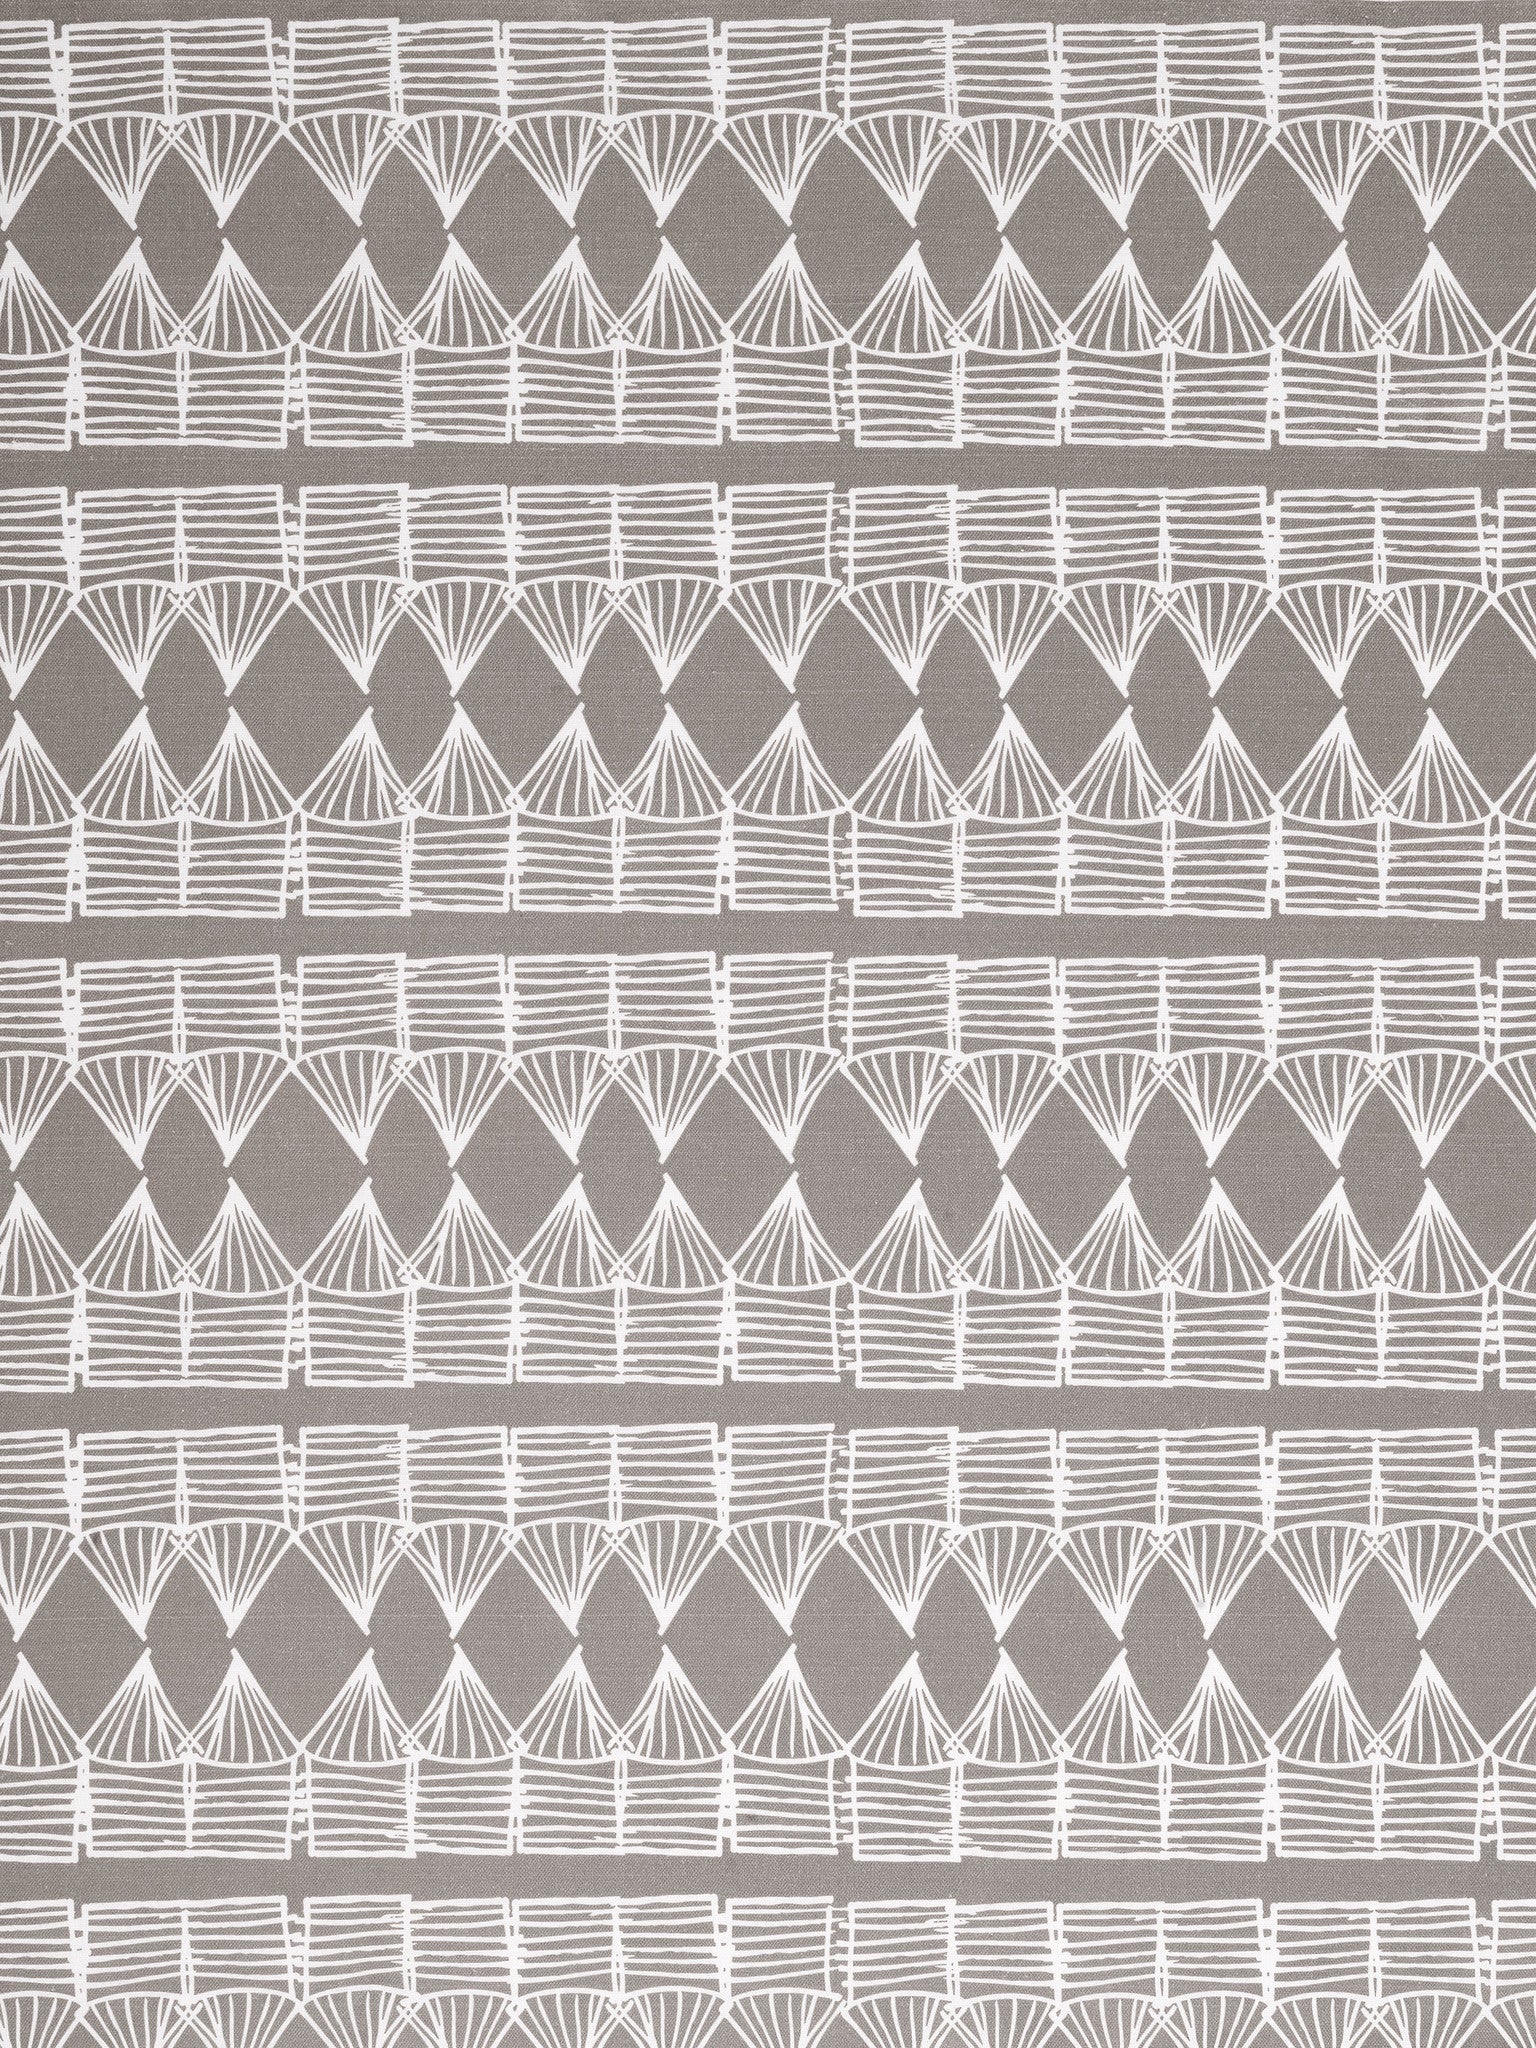 Tiki Huts Pattern Cotton Linen Designer Home Decor Fabric by the meter or by the yard for curtains, blinds, upholstery in Light Dove Grey ships from Canada USA